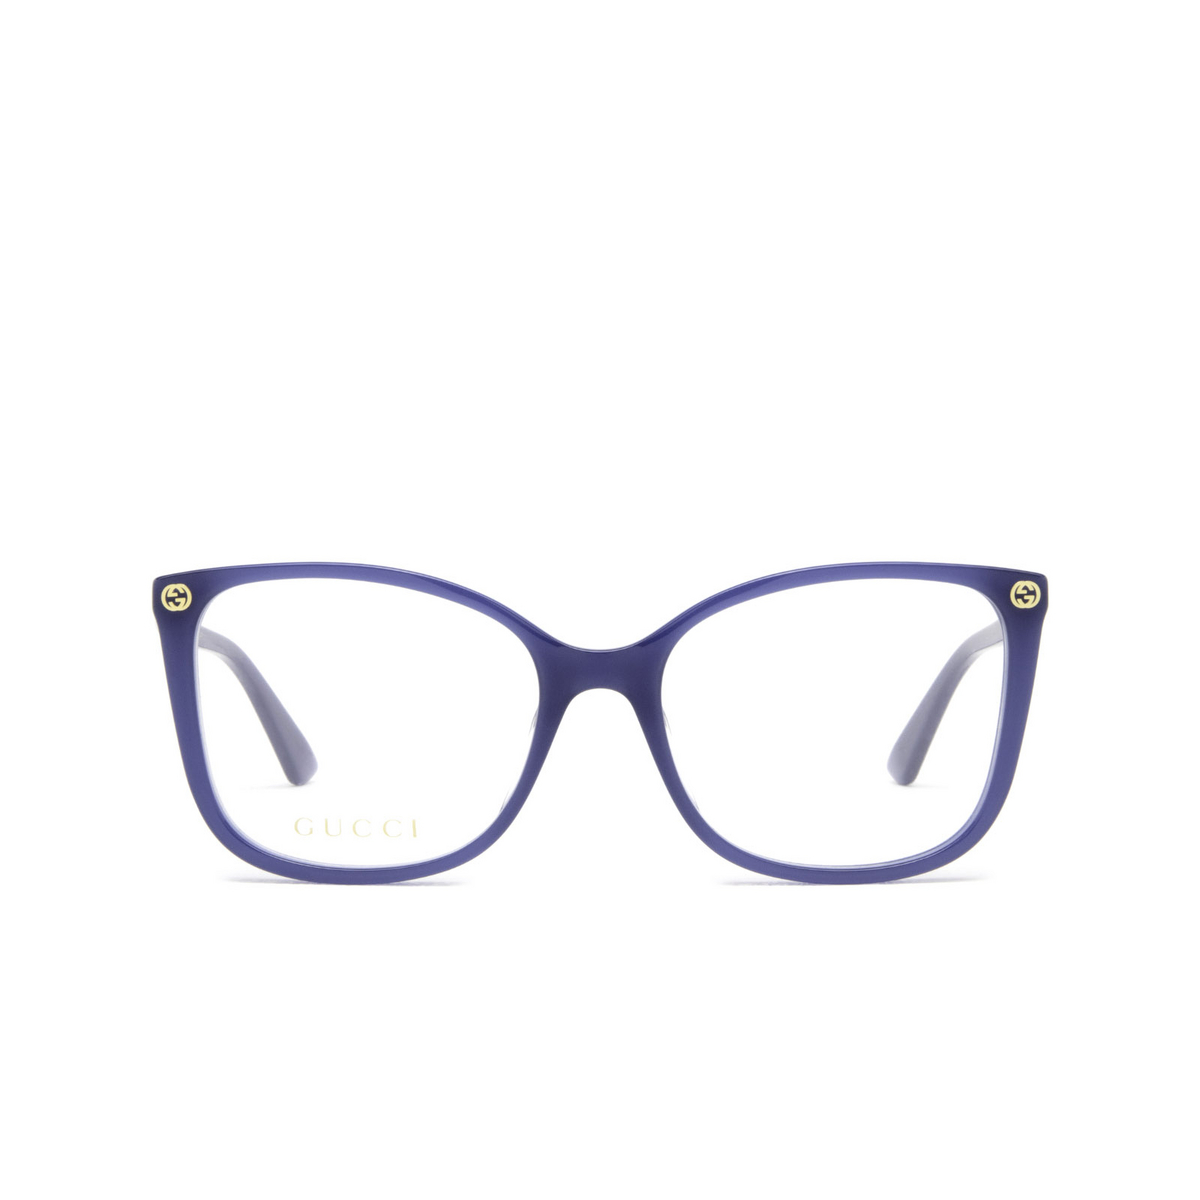 Gucci® Cat-eye Eyeglasses: GG0026O color Blue 011 - front view.